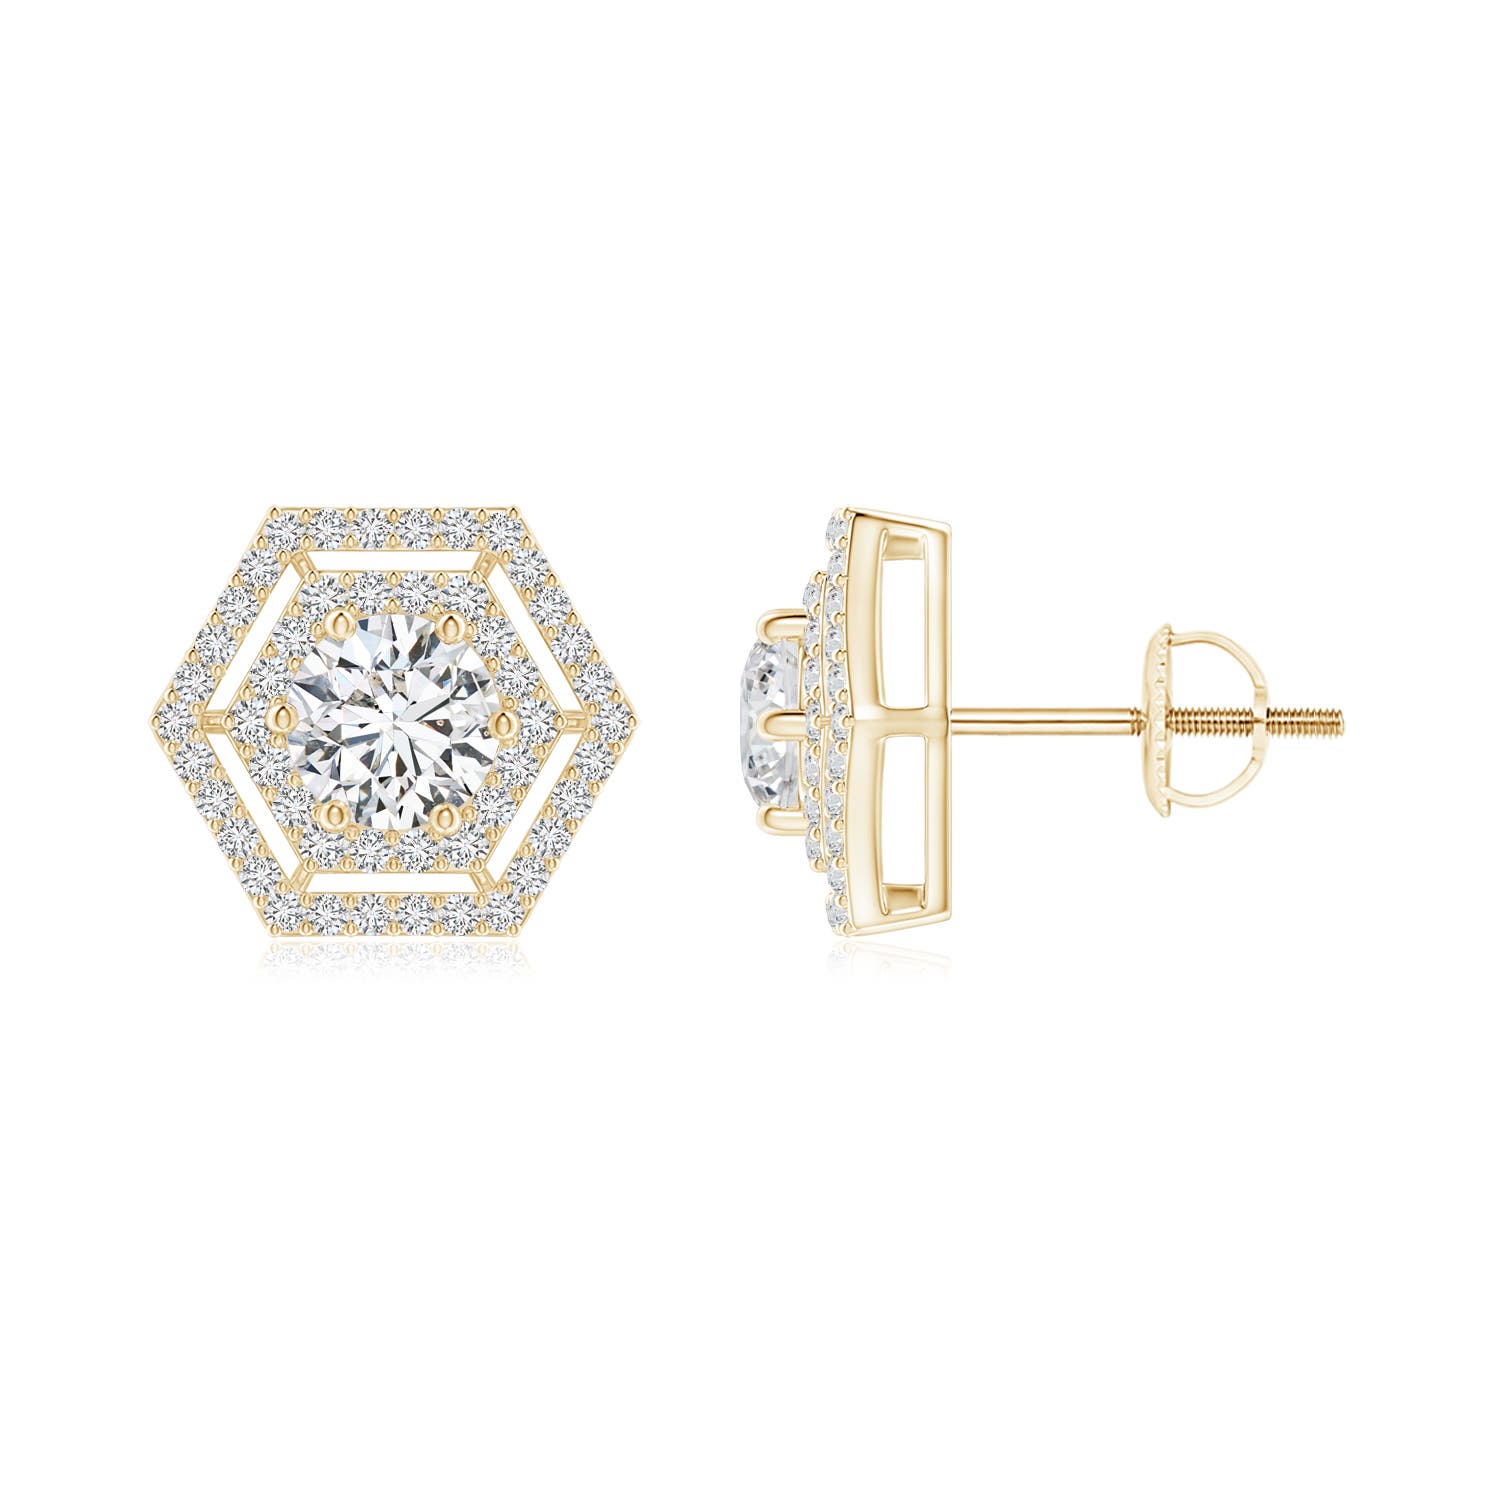 H, SI2 / 1.21 CT / 14 KT Yellow Gold